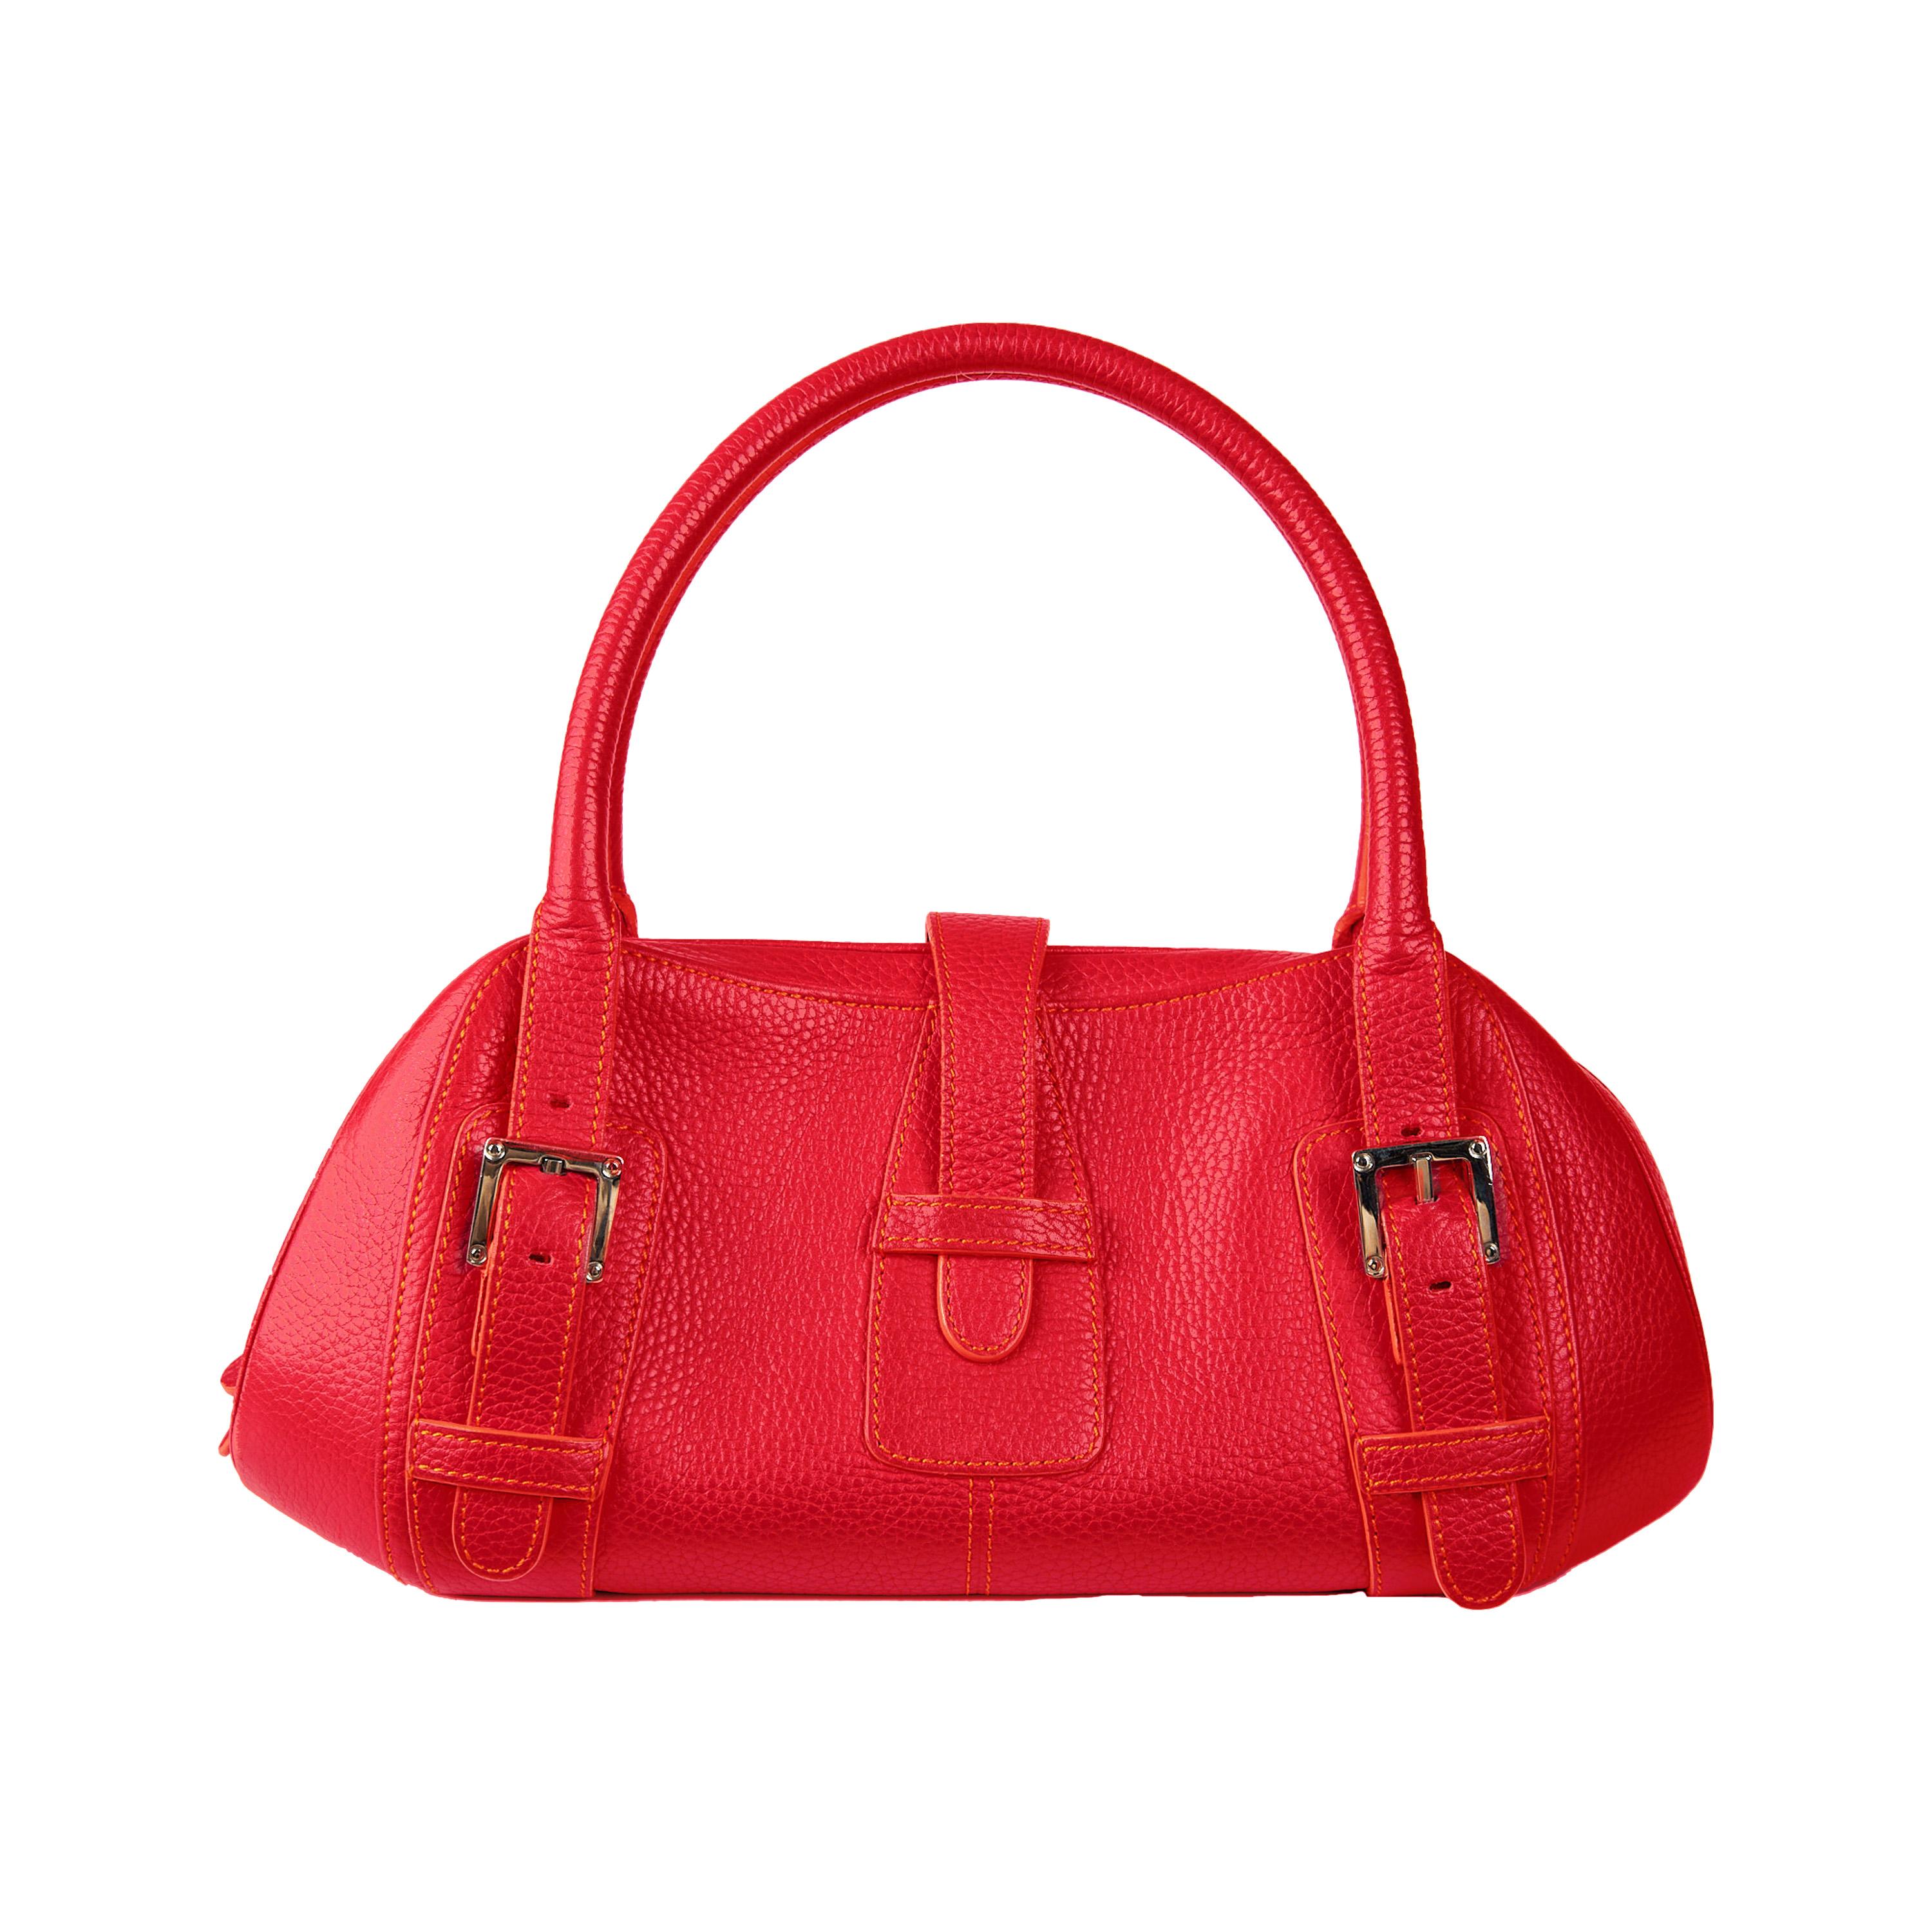 This luxurious Loewe Senda Handbag is crafted from soft red leather and is accented with buckles in silver-tone hardware and tonal stitching in orange. With a secure top zip closure and a black signature jacquard lined interior featuring a zippered